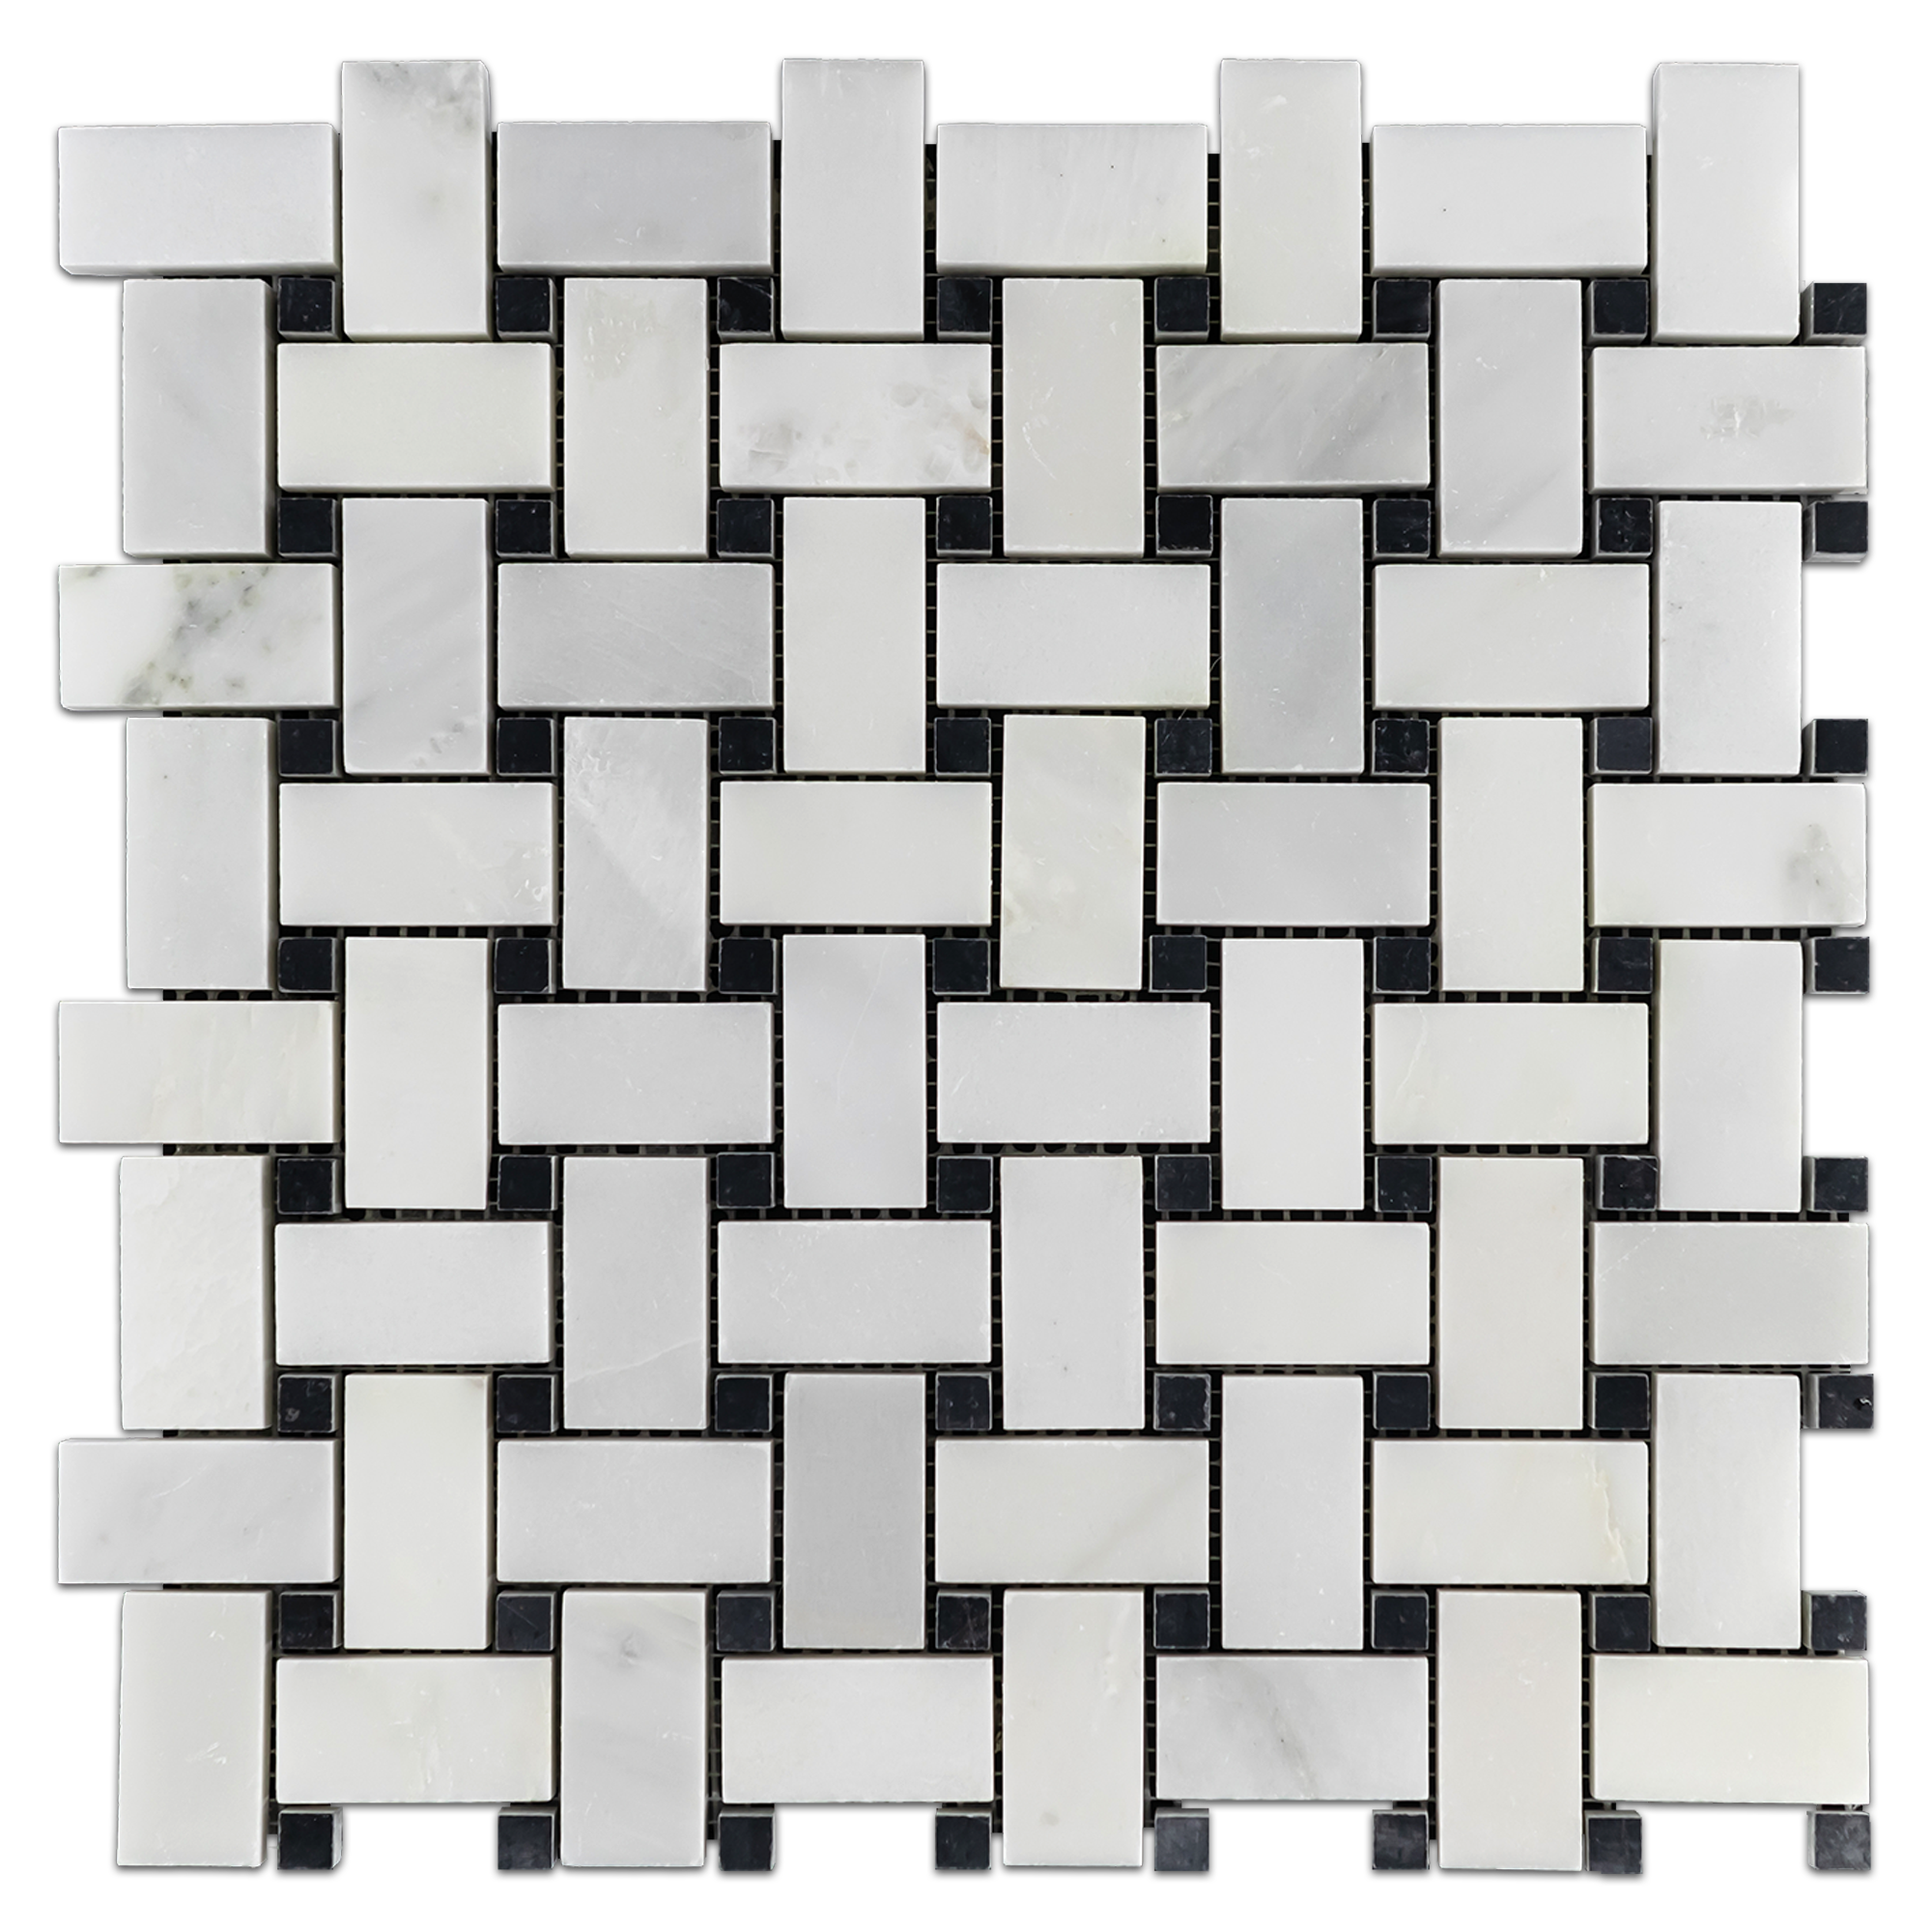 Elon Pearl White Black Marble Stone Blend Basketweave Field Mosaic 12x12x0.375 Polished Tile - Surface Group Online Store